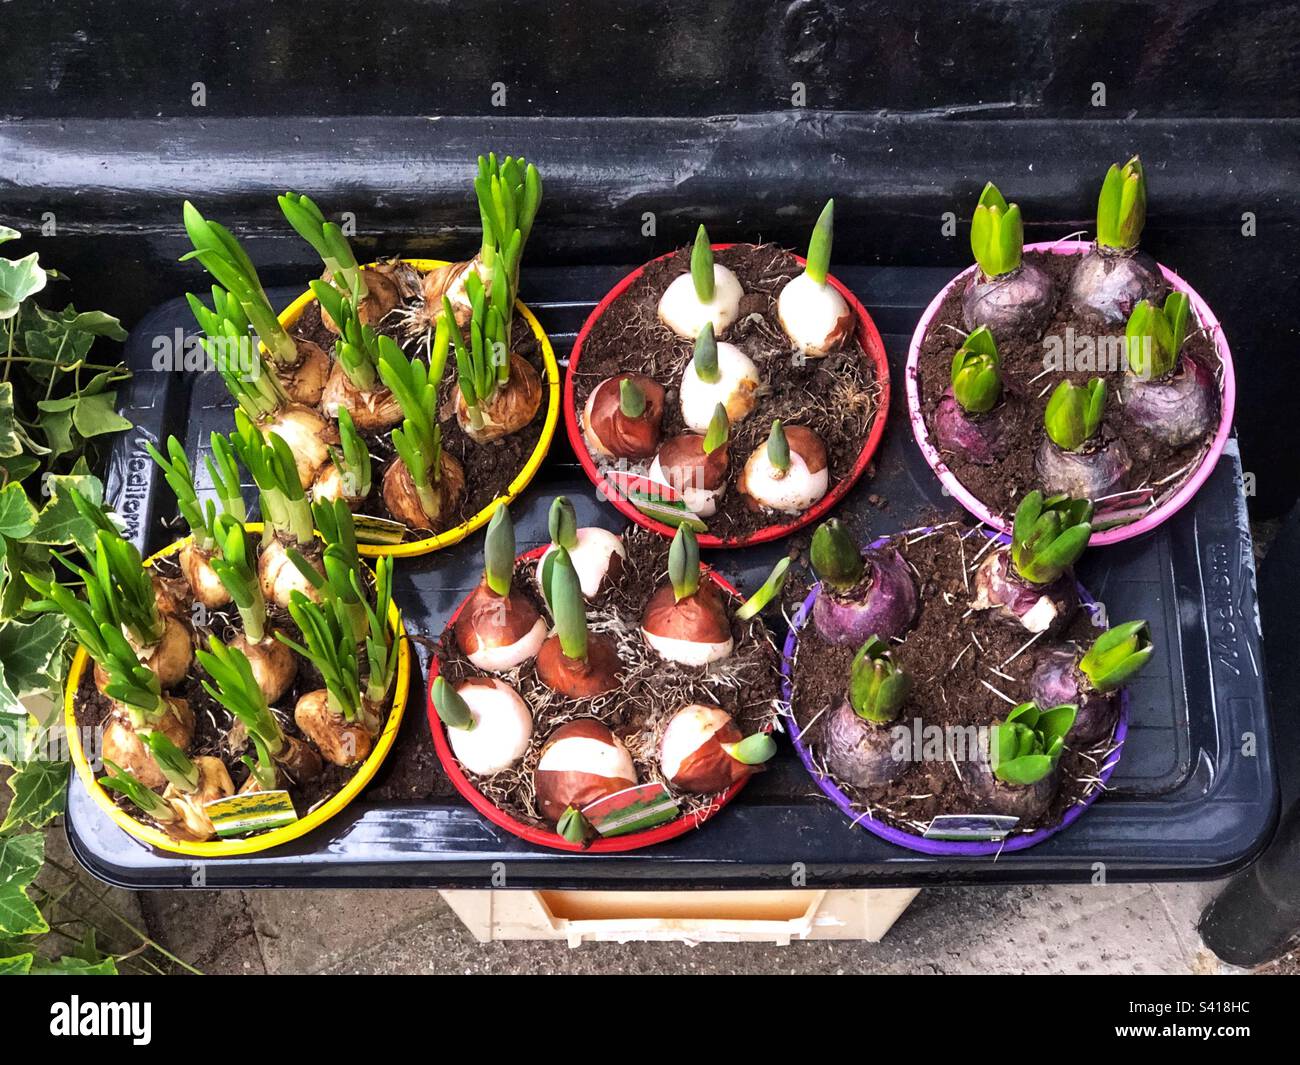 Sprouting Spring shoots of Tulip, Hyacinth and Narcissus Tête-à-tête Daffodil bulbs in pots for sale at florist Stock Photo